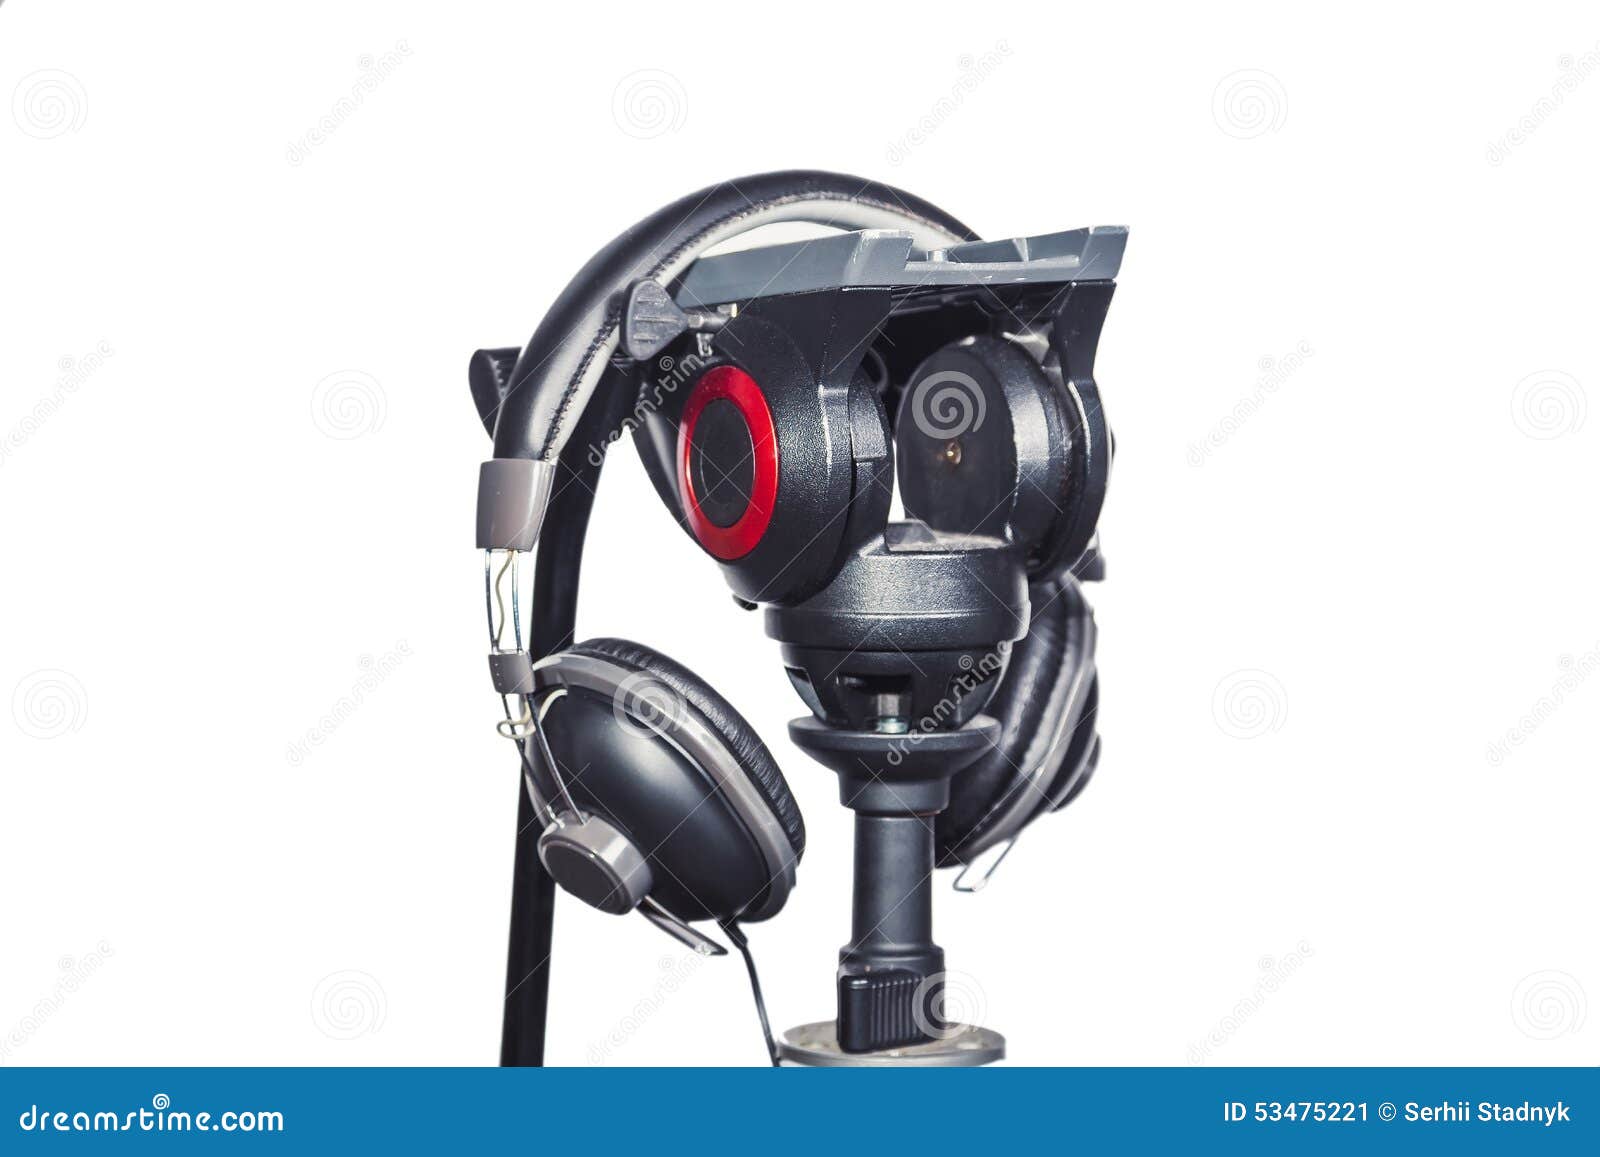 headphones and a tripod on a white background musica, audio recording